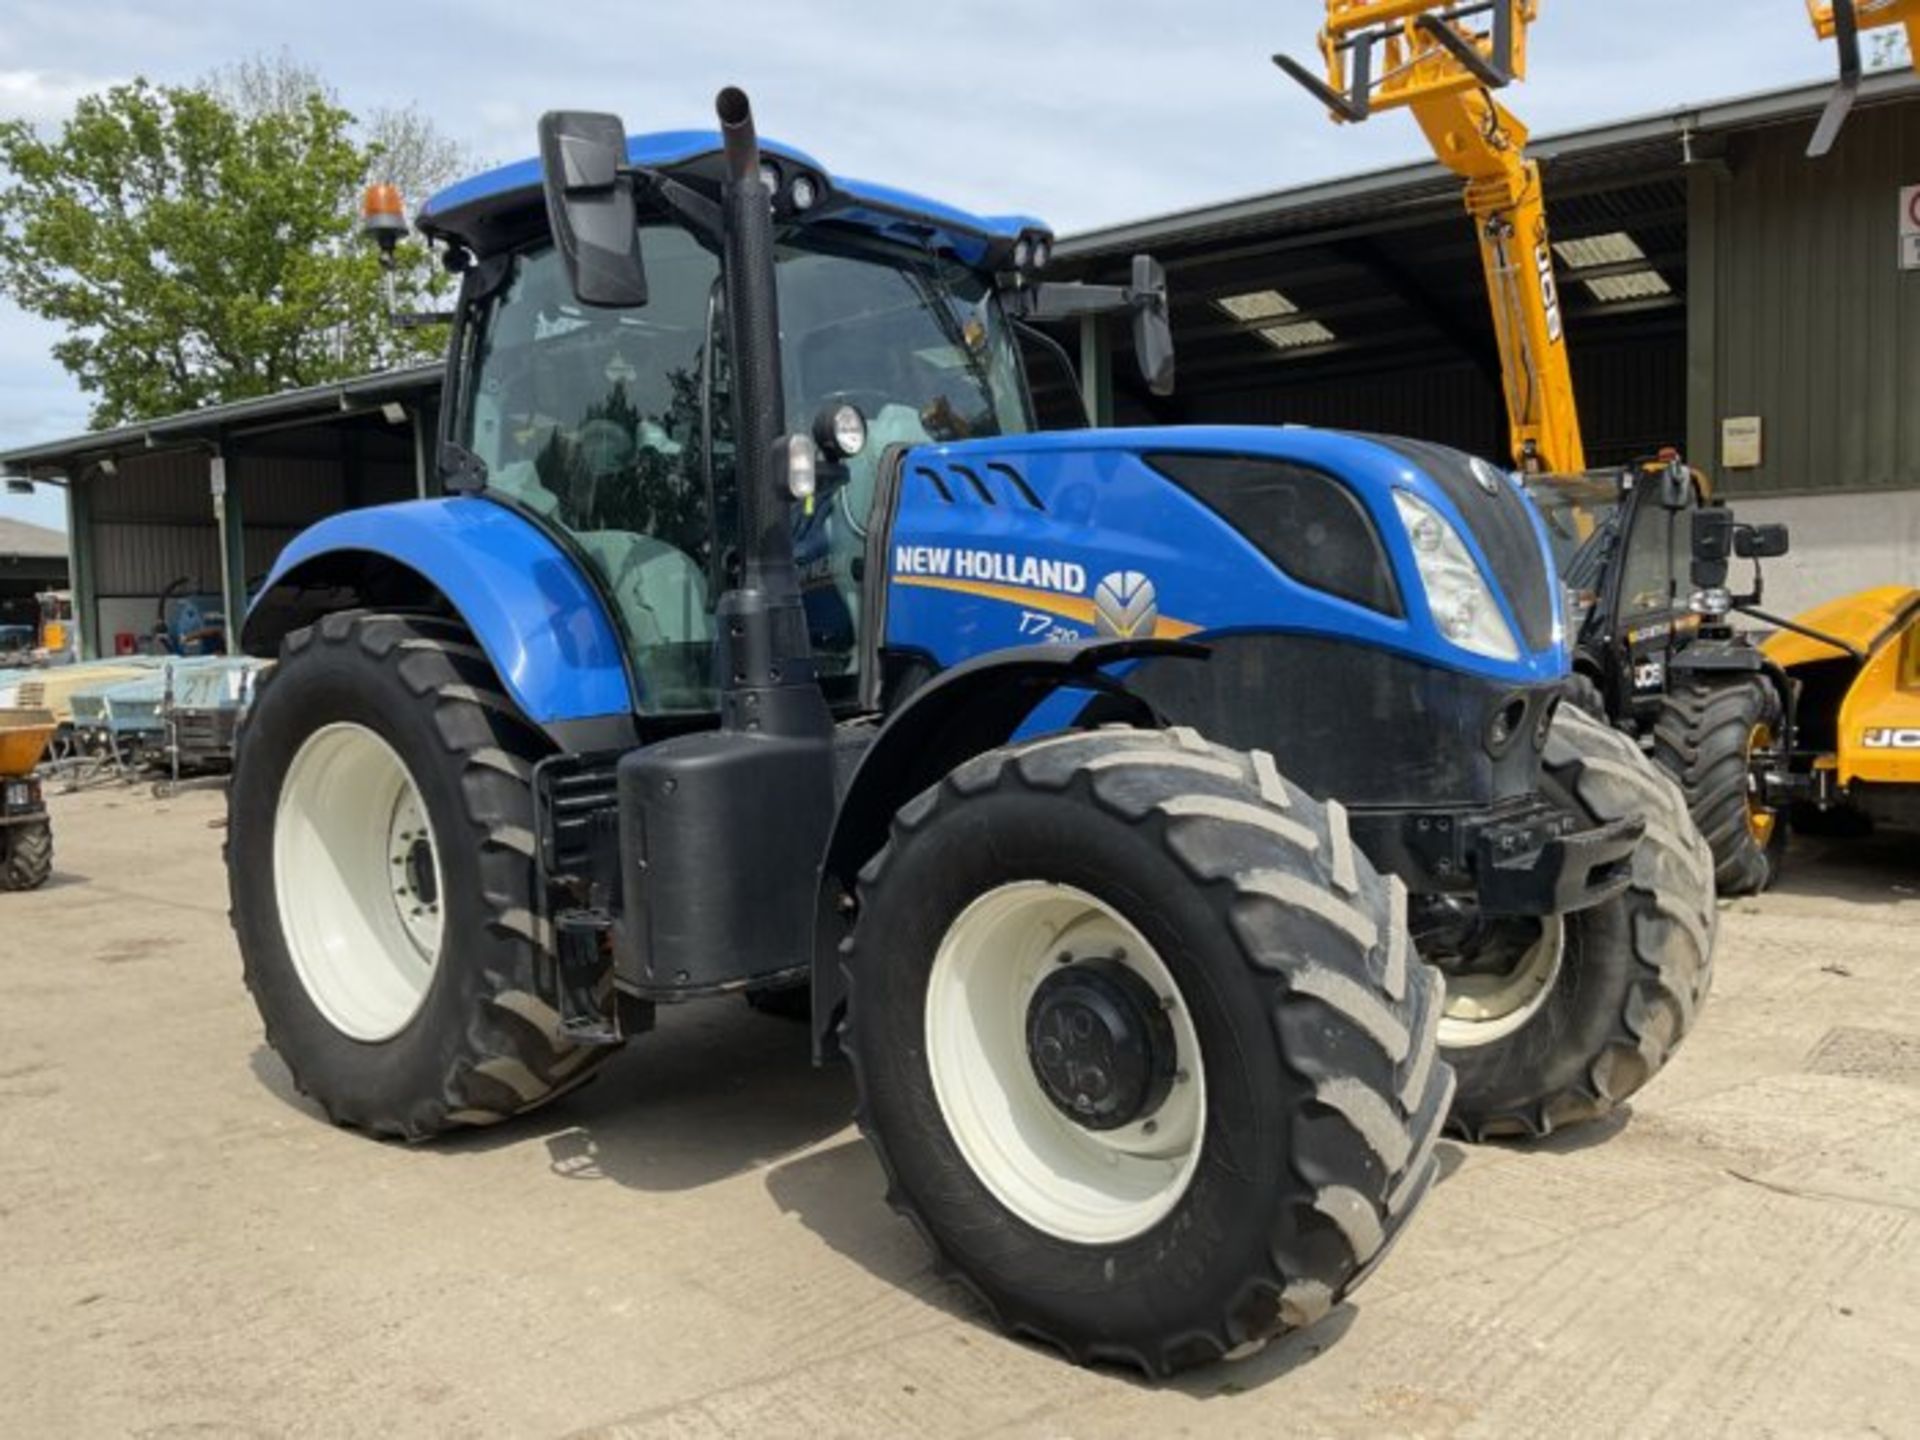 NEW HOLLAND T7.210 4033 HOURS. 2020 – 20 REG. - Image 9 of 11